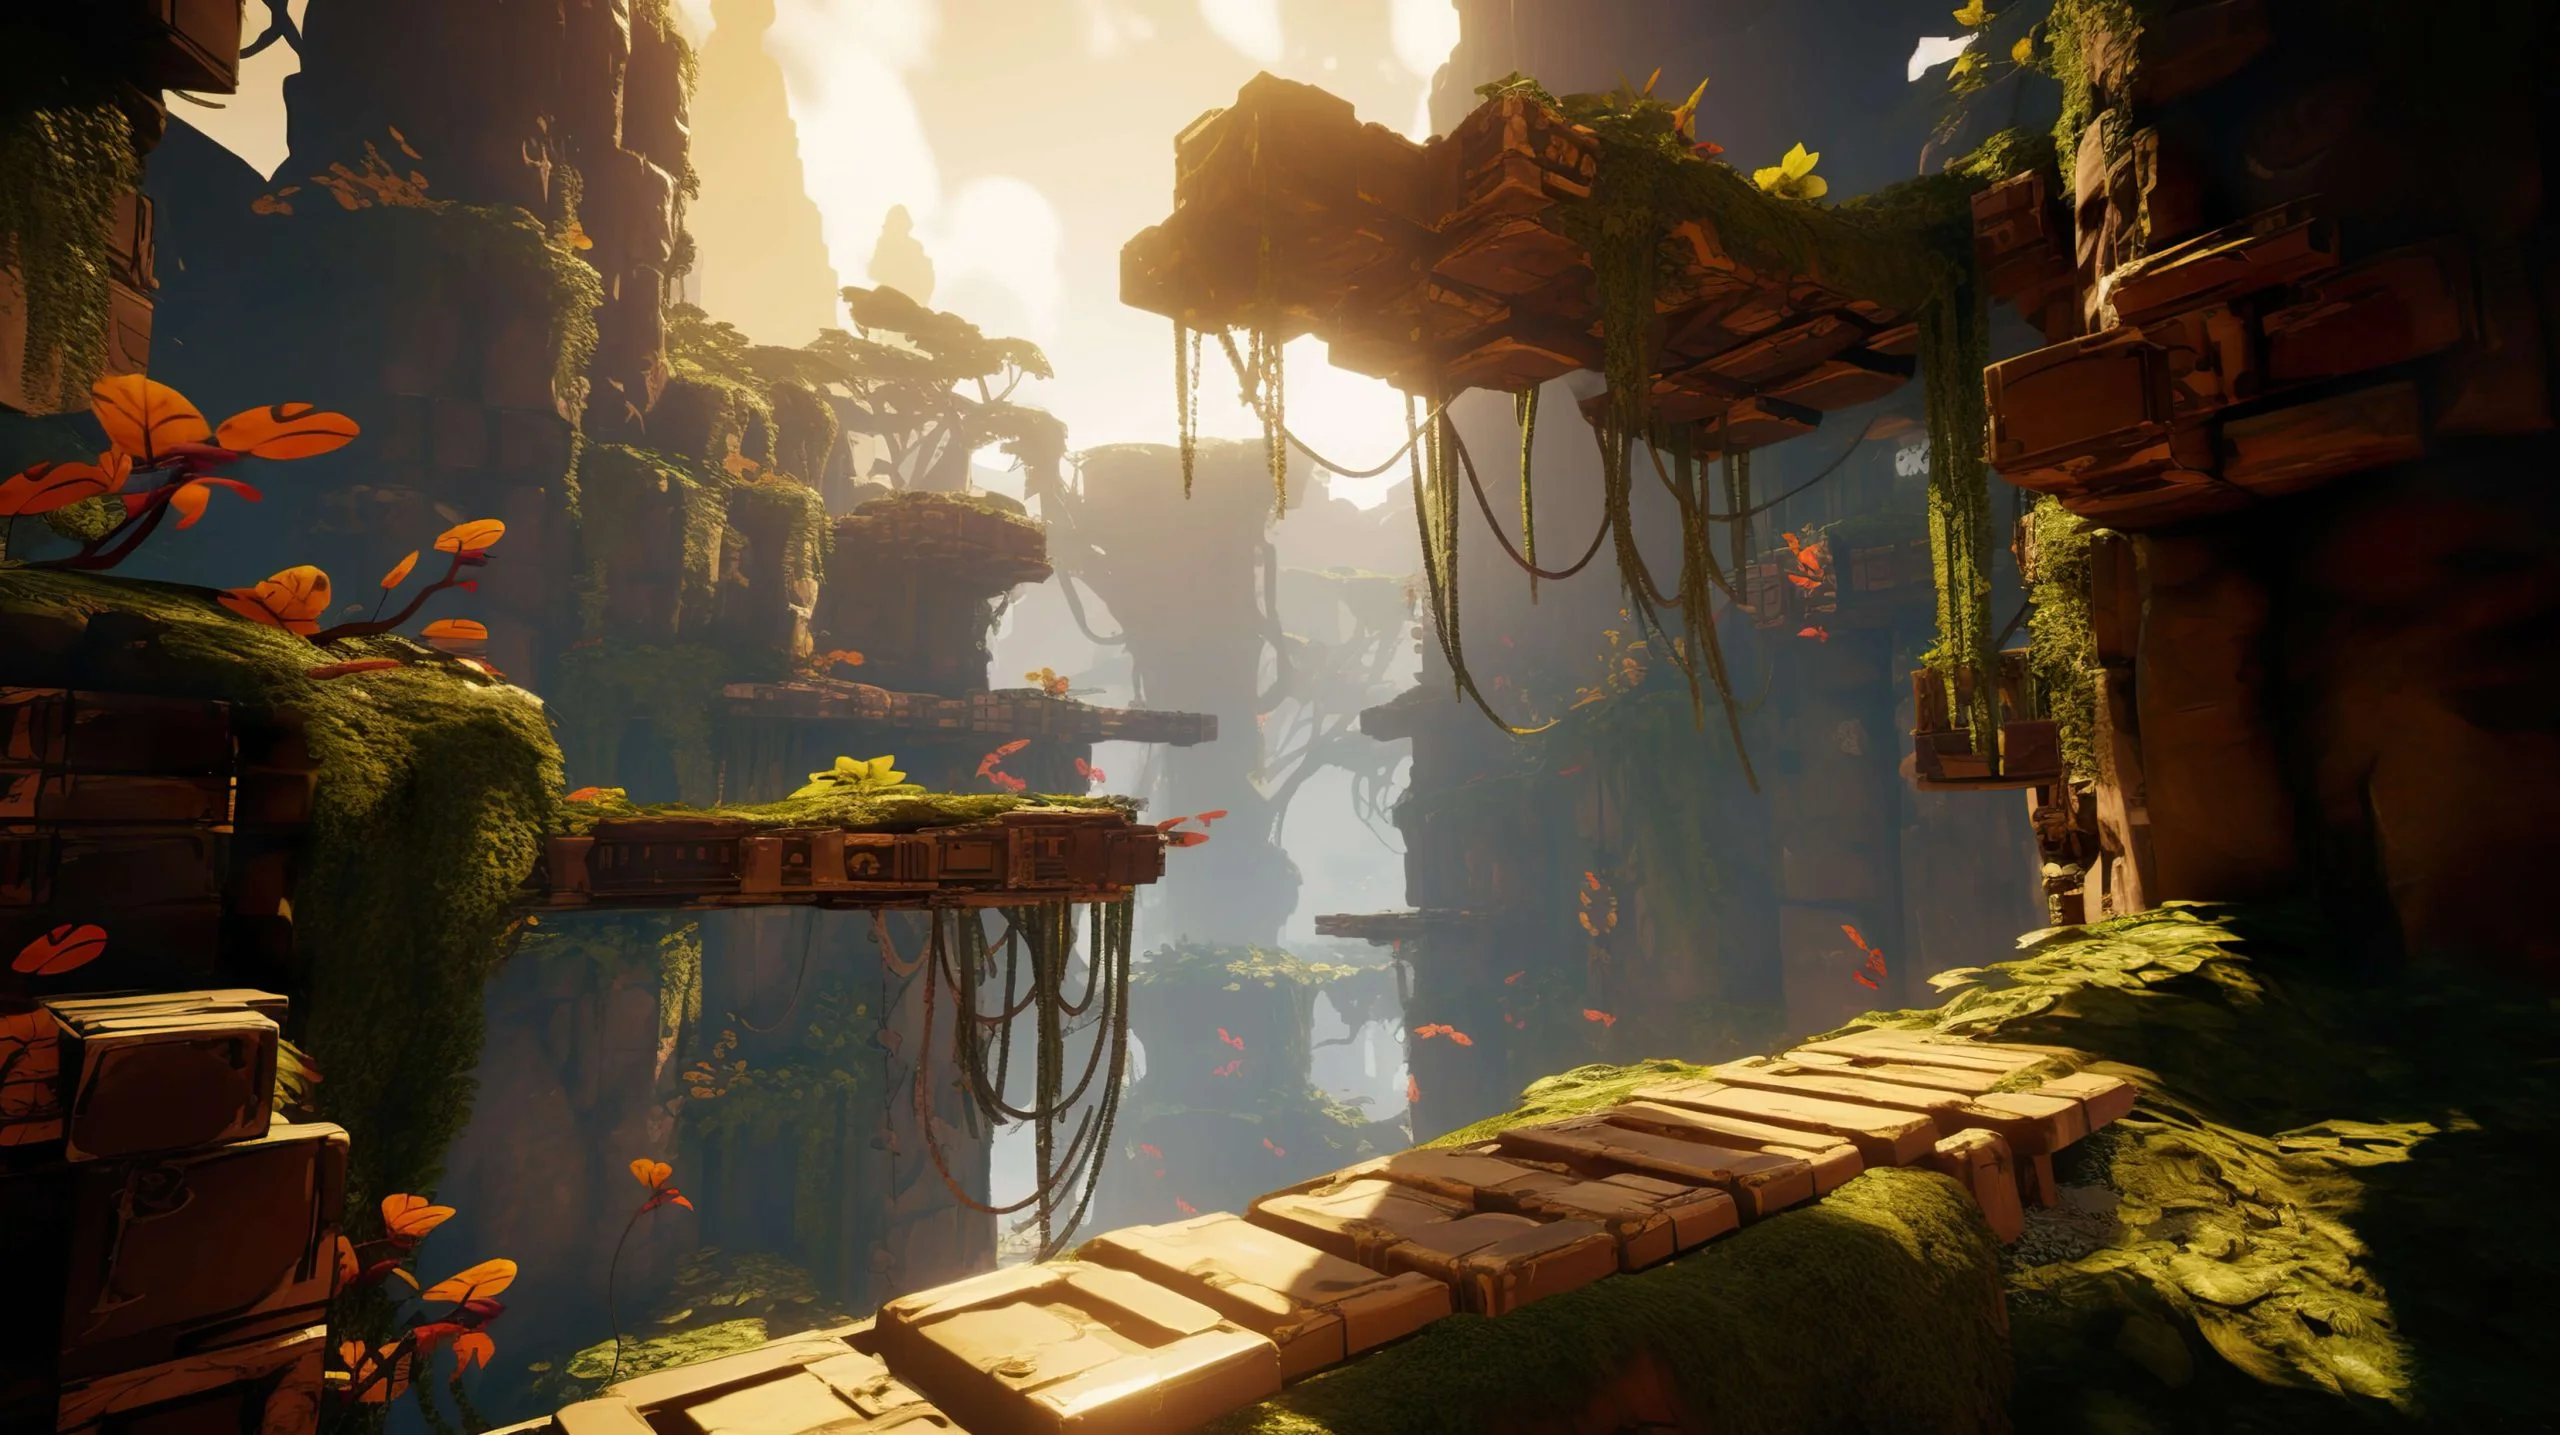 Creating Immersive Gameplay The Art of Level Design in Video Games